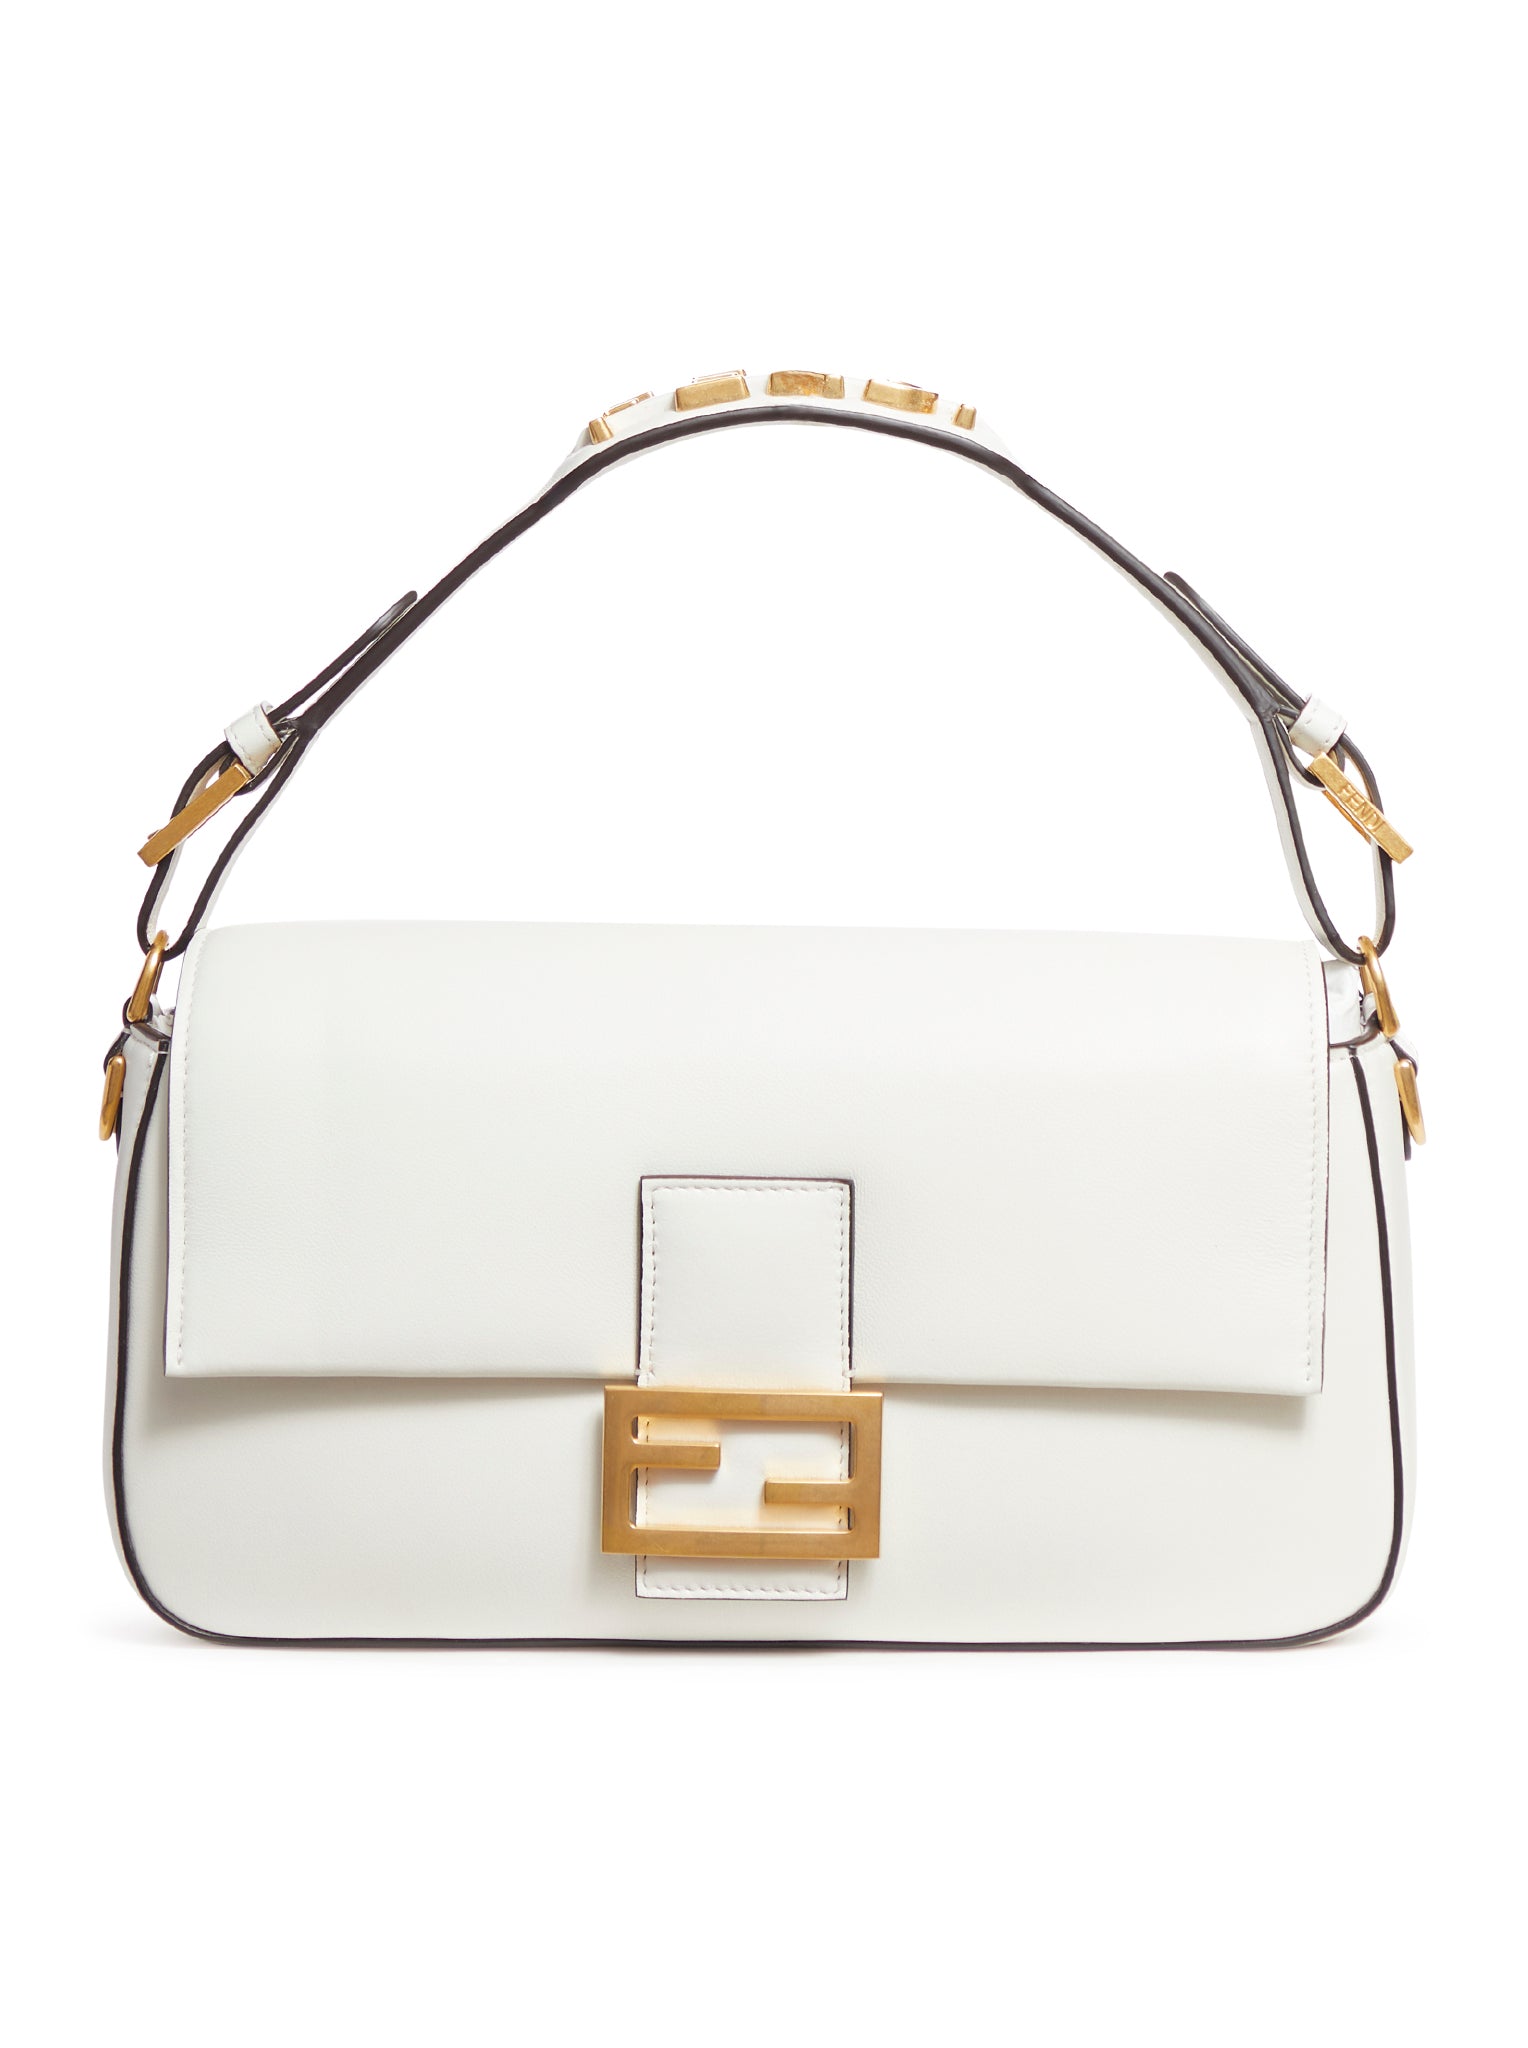 WHITE LEATHER BAGUETTE BAG